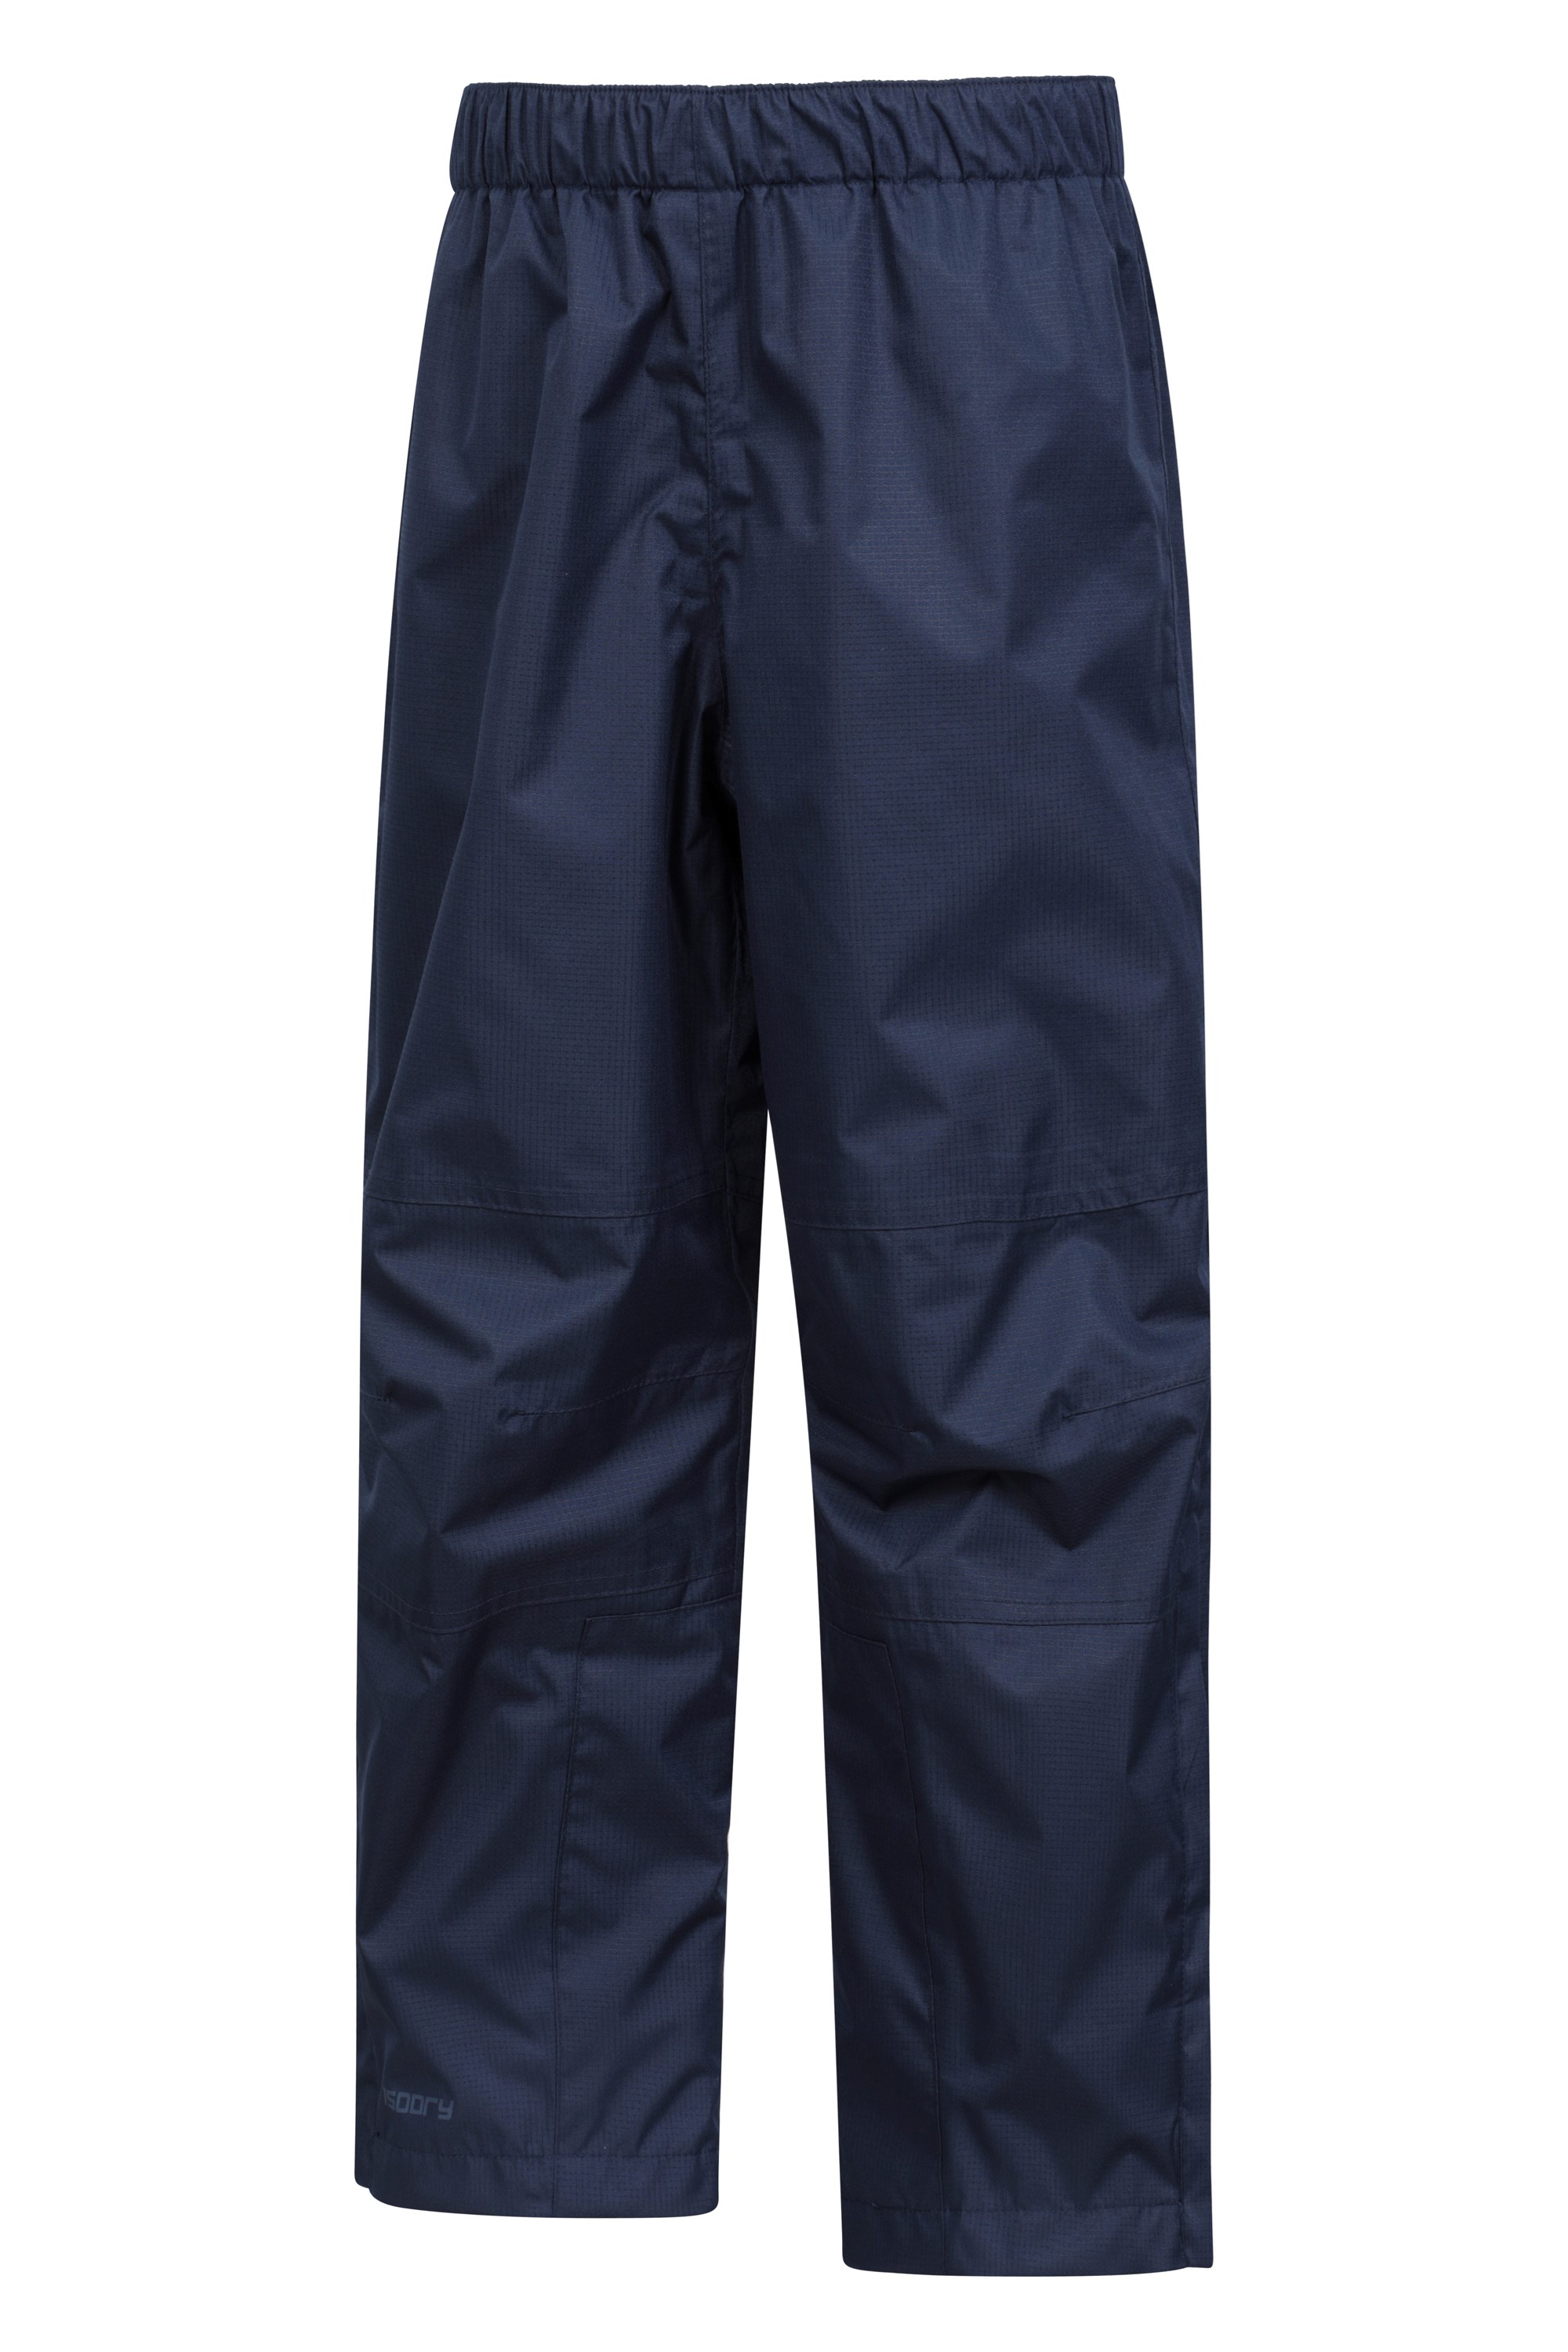 051891 DOWNPOUR KIDS WATERPROOF OVERTROUSERS